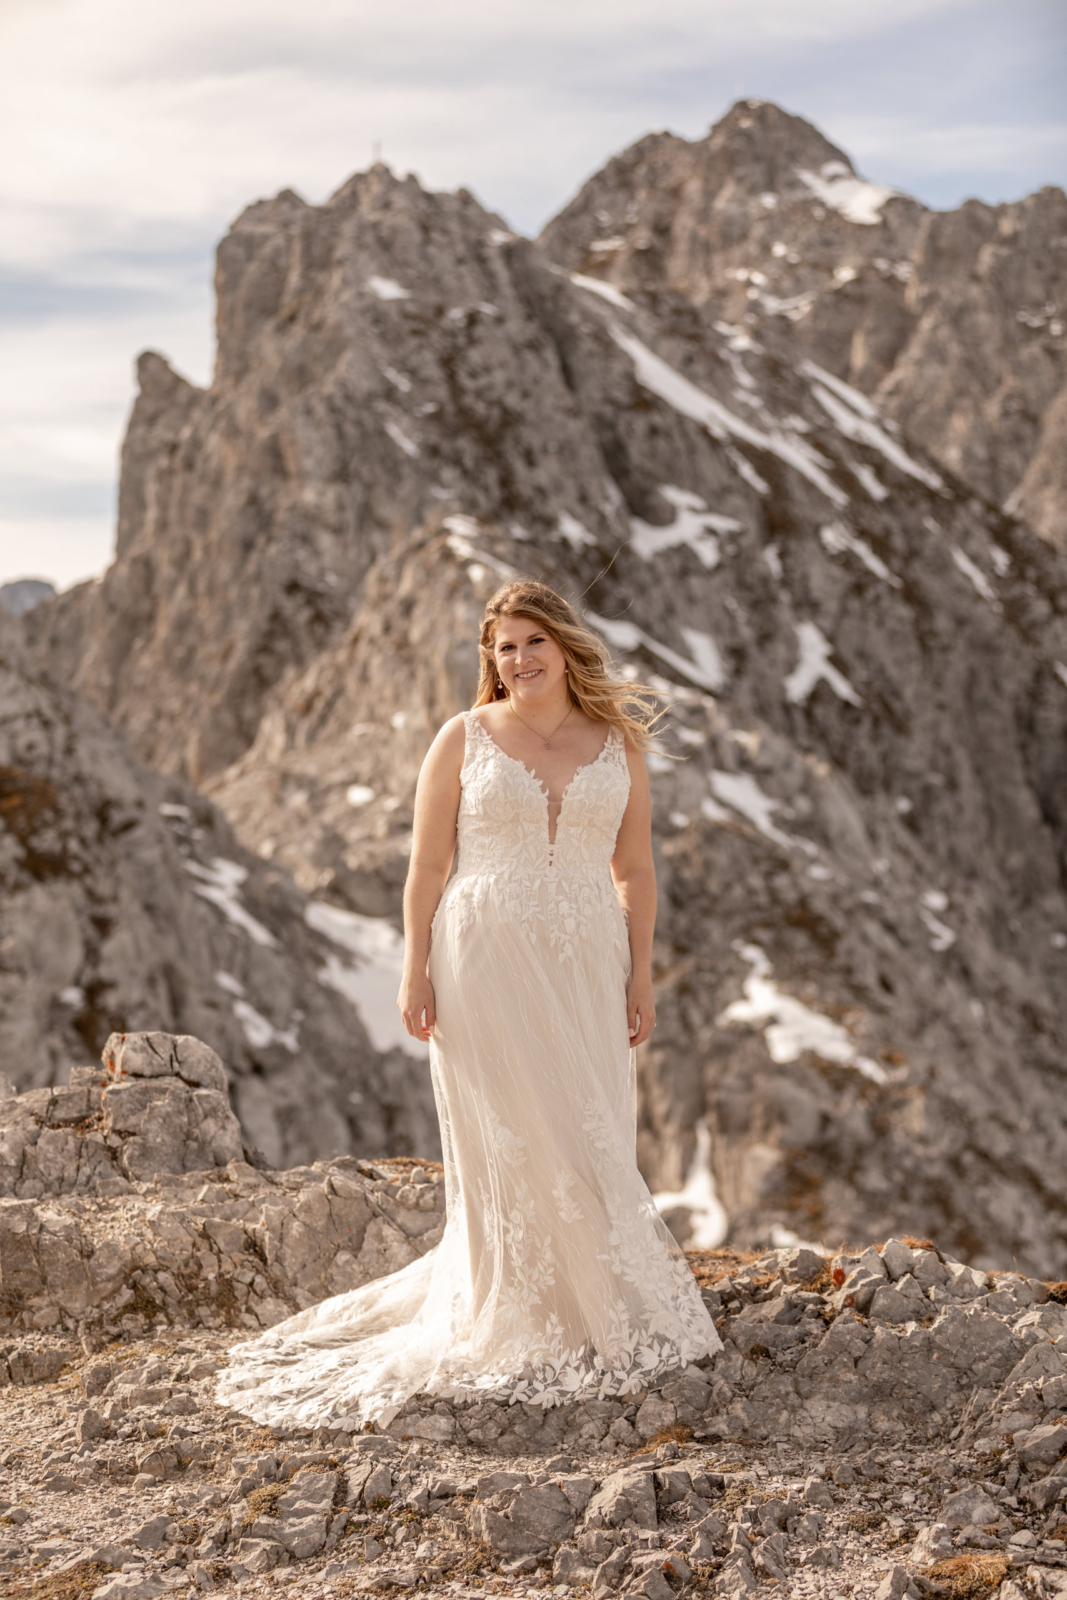 Bridal Portraits in the Mountains